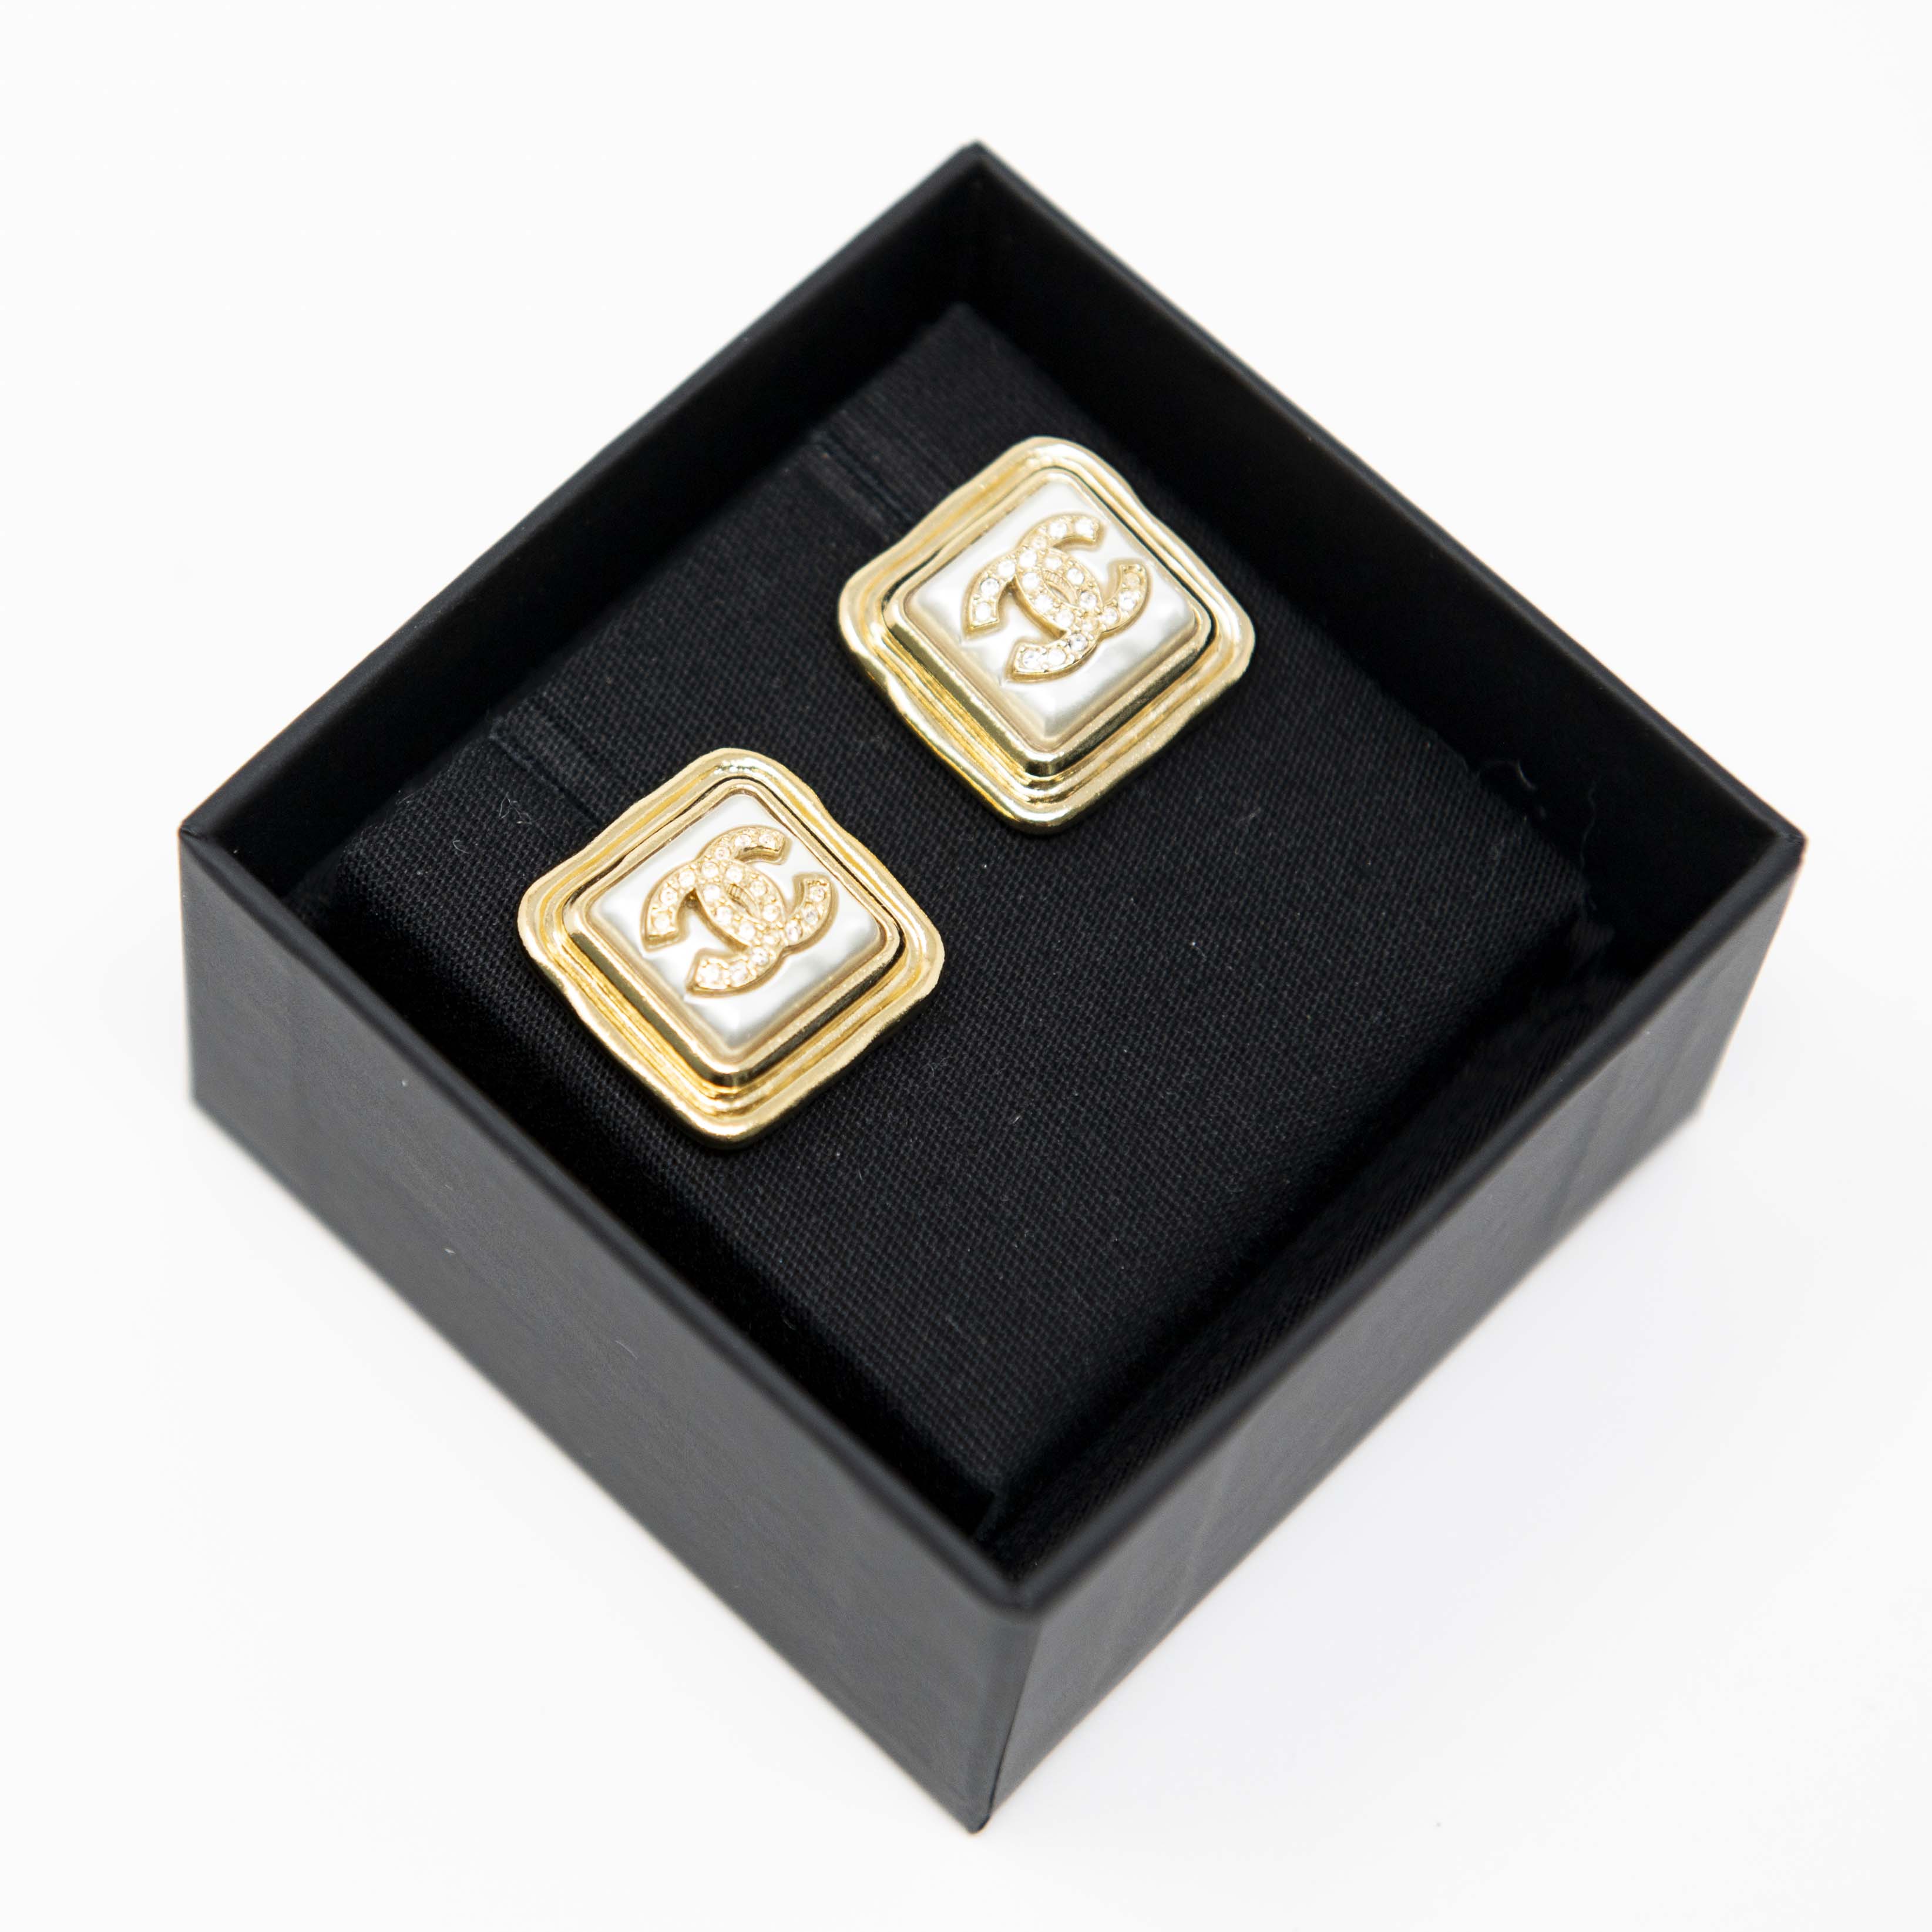 Chanel Square CC Earrings